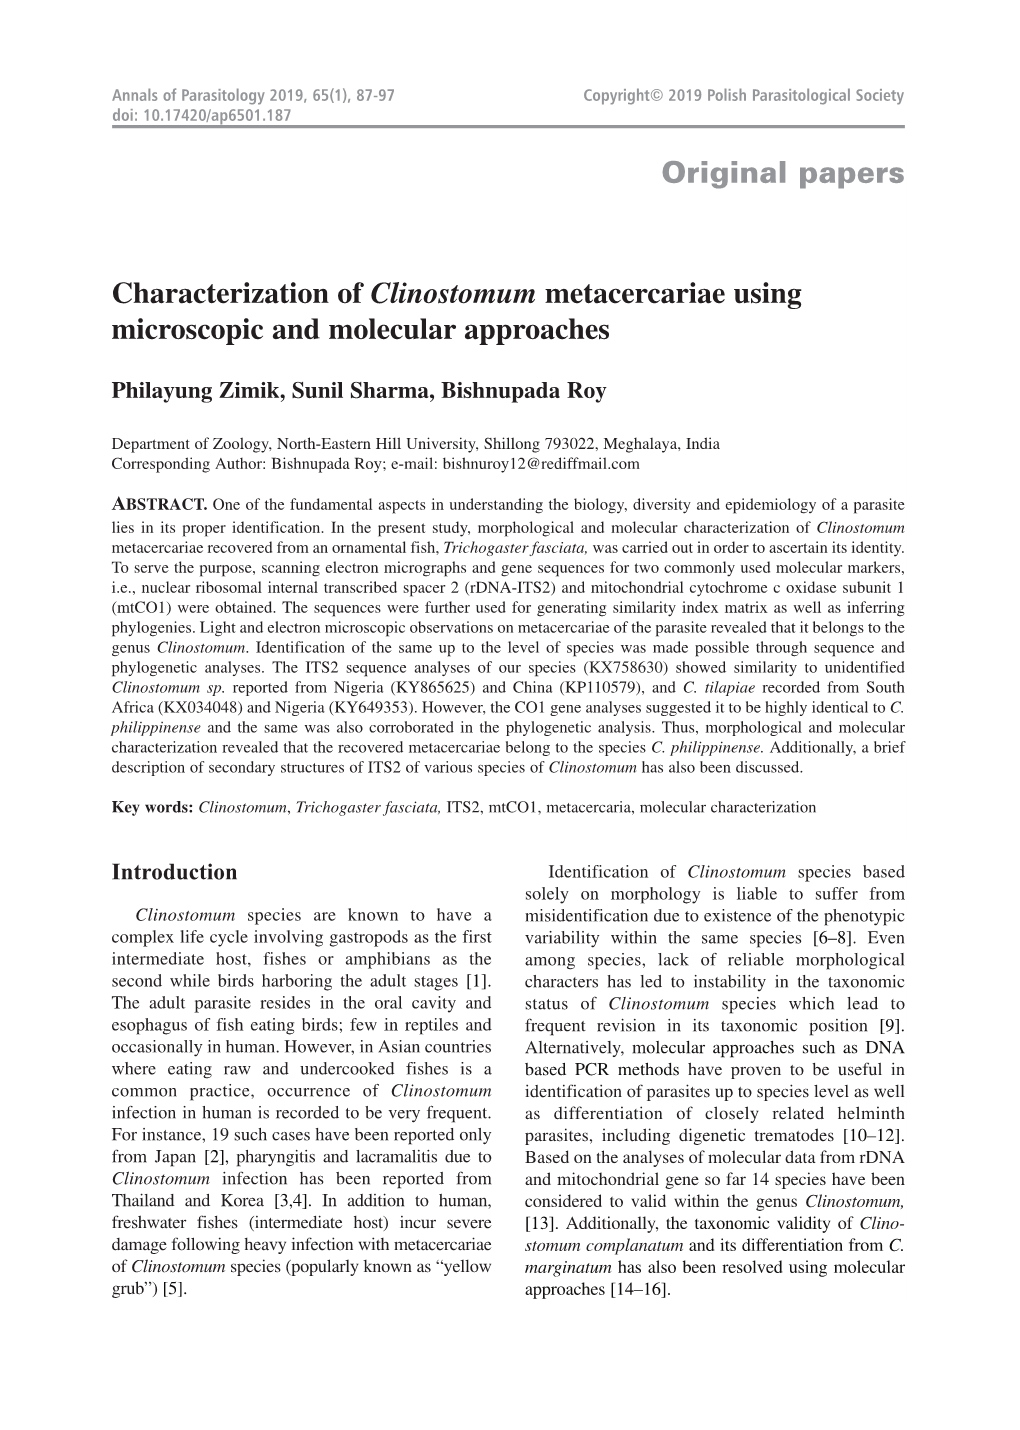 Original Papers Characterization of Clinostomum Metacercariae Using Microscopic and Molecular Approaches